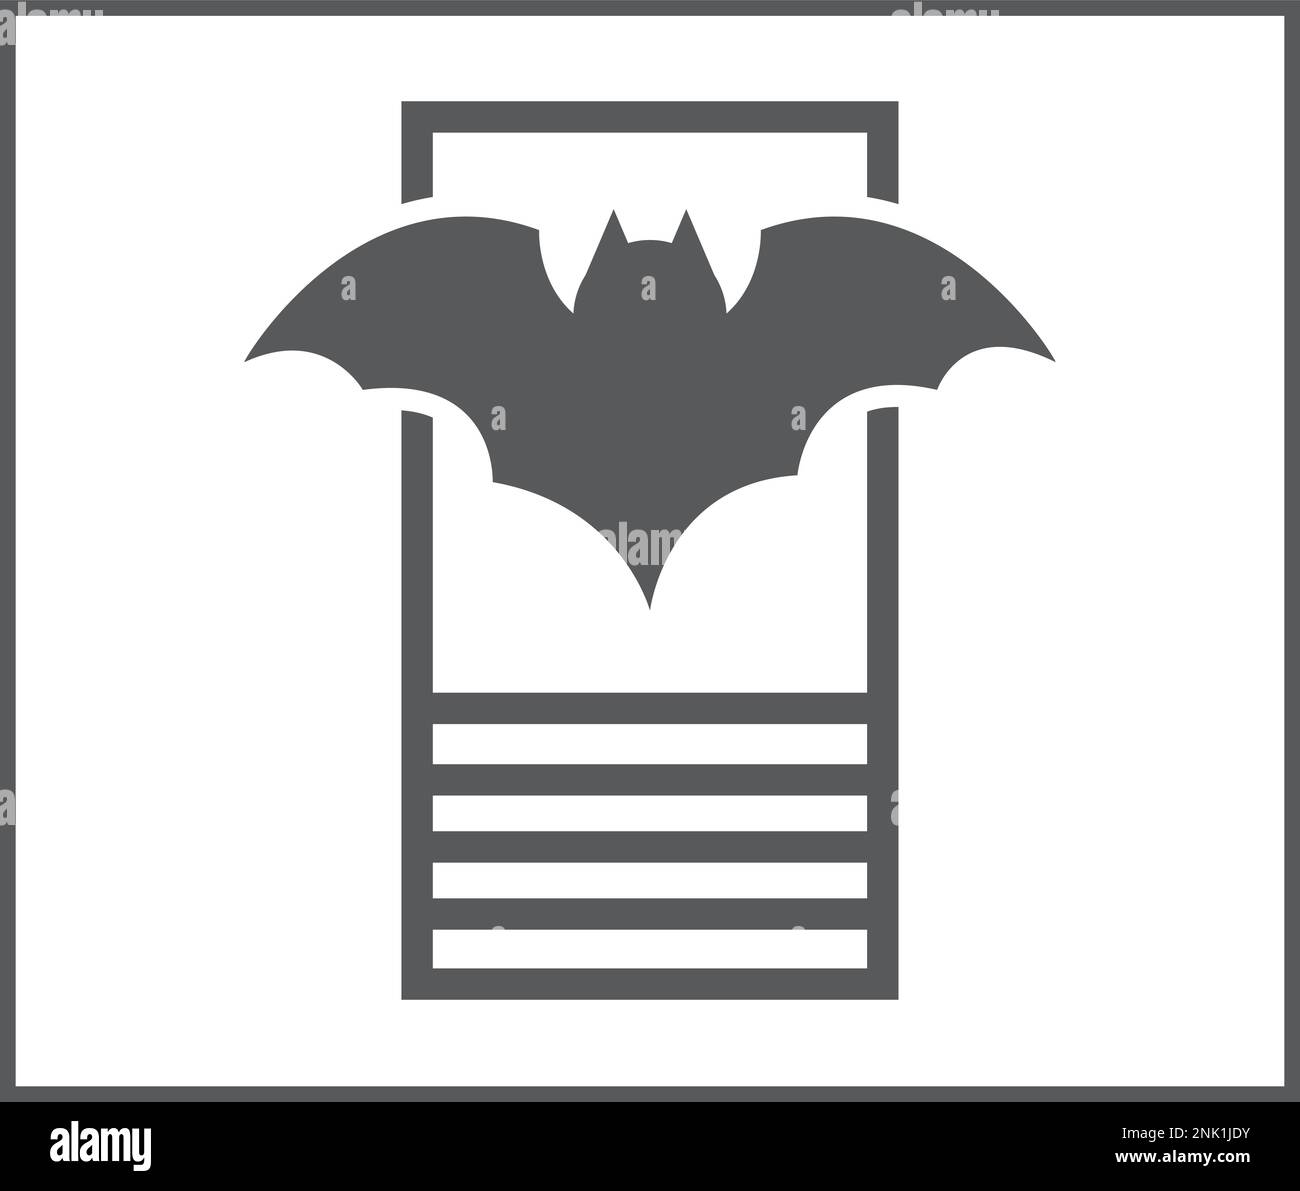 Bat nesting box for buildings to save the species Stock Vector